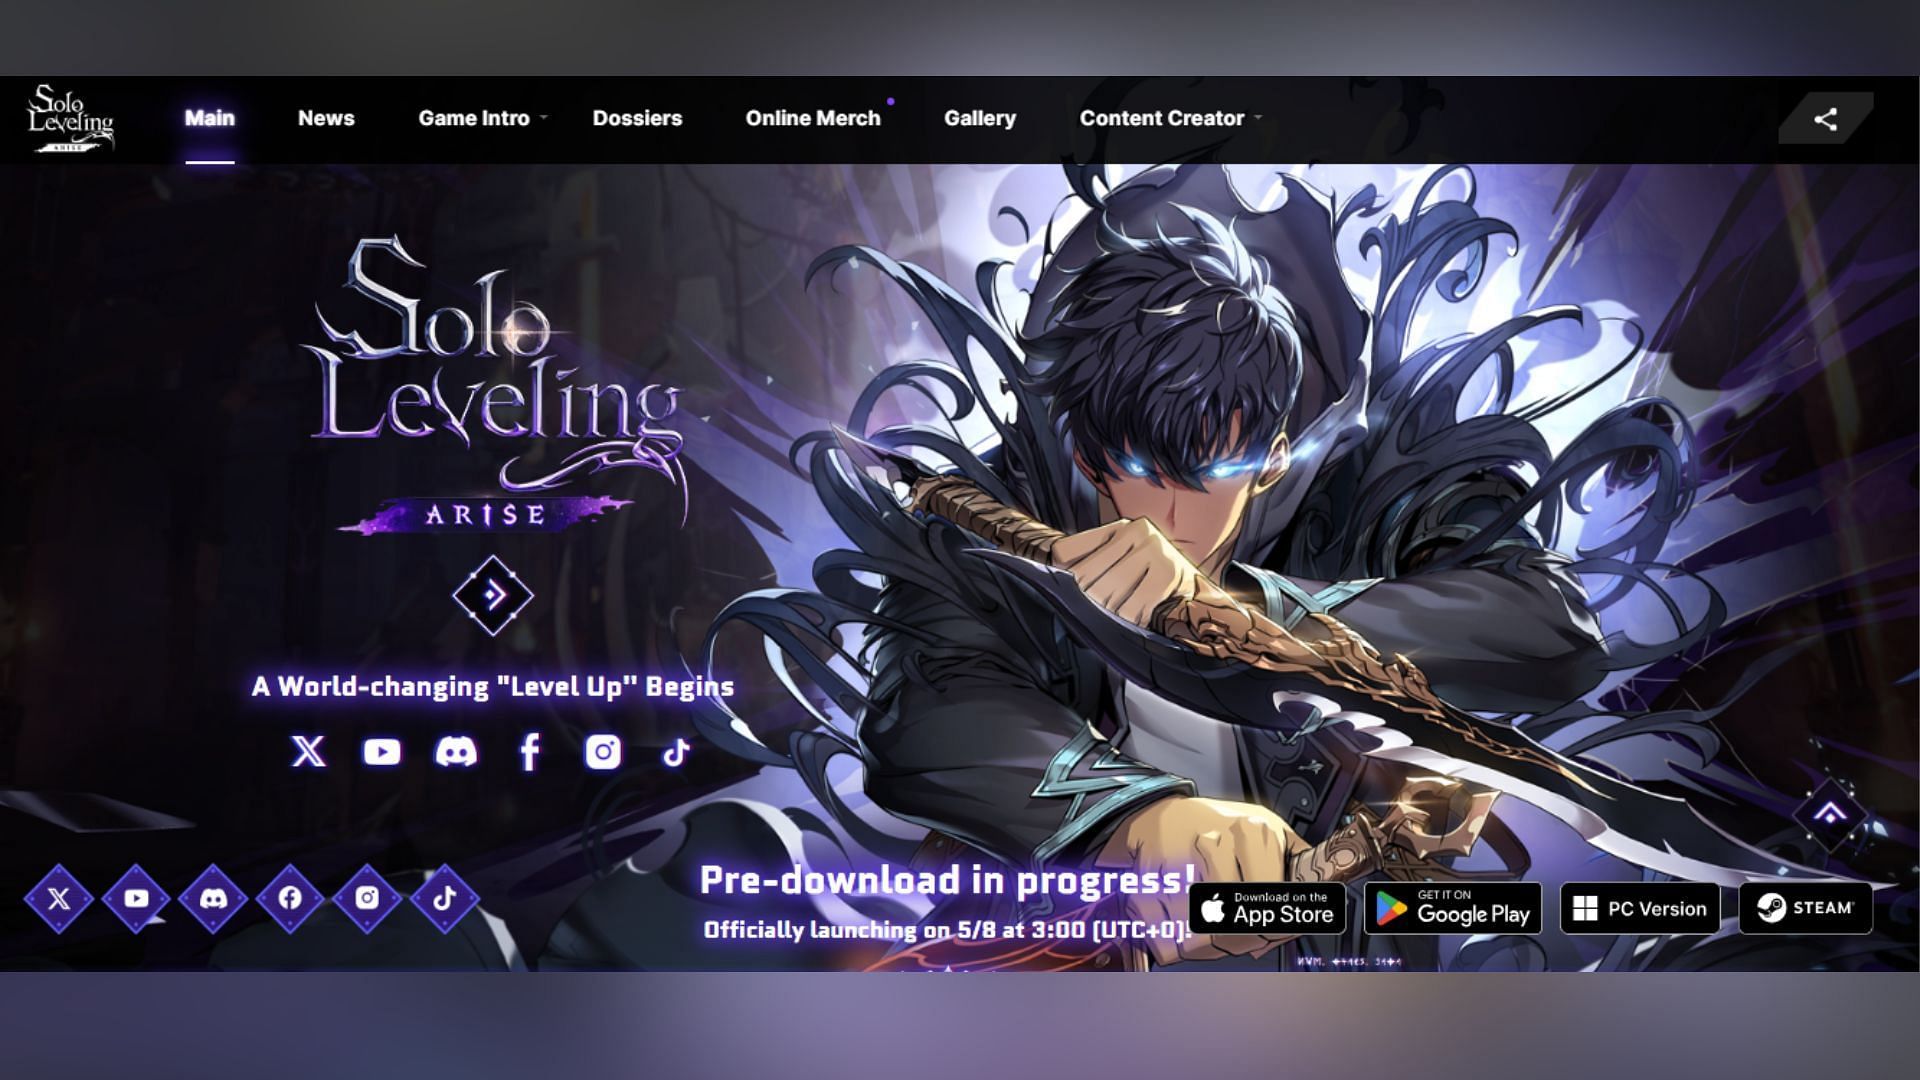 Solo Leveling Arise PC version can be downloaded from the official website. (Image via Netmarble)